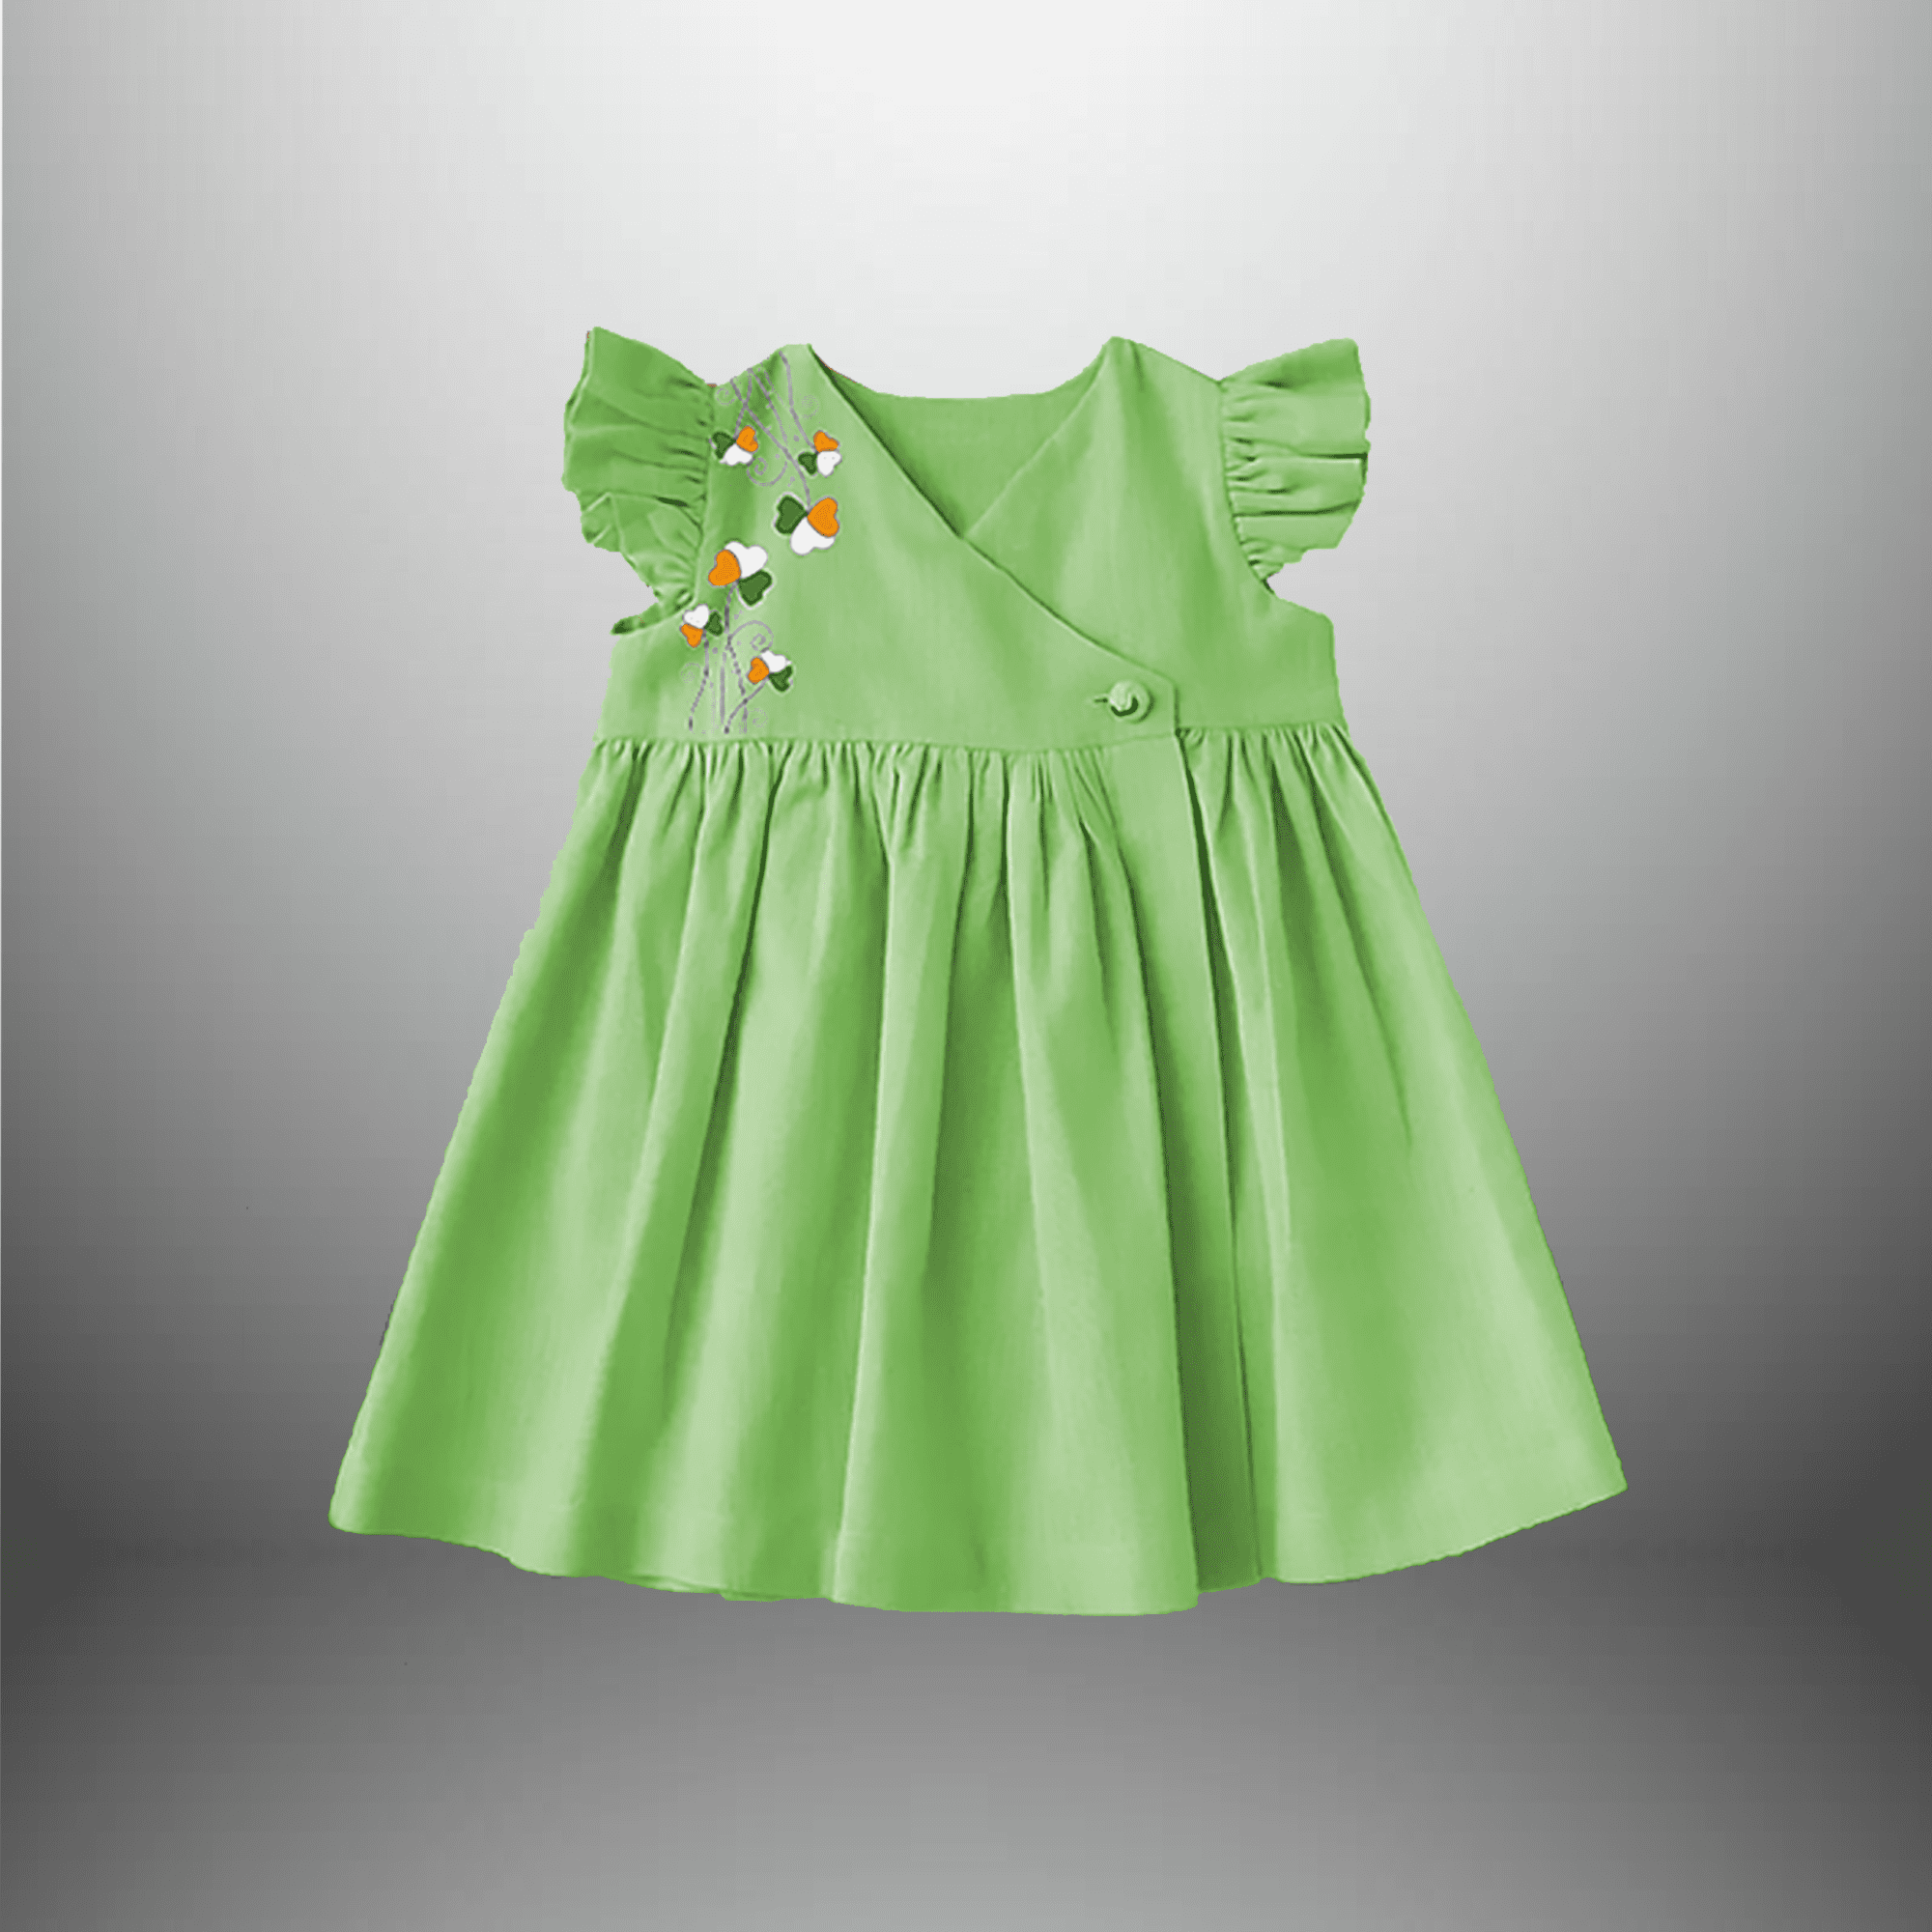 Girls Knee Length Frock with Frills and Tri-color Motif-RKFCW377